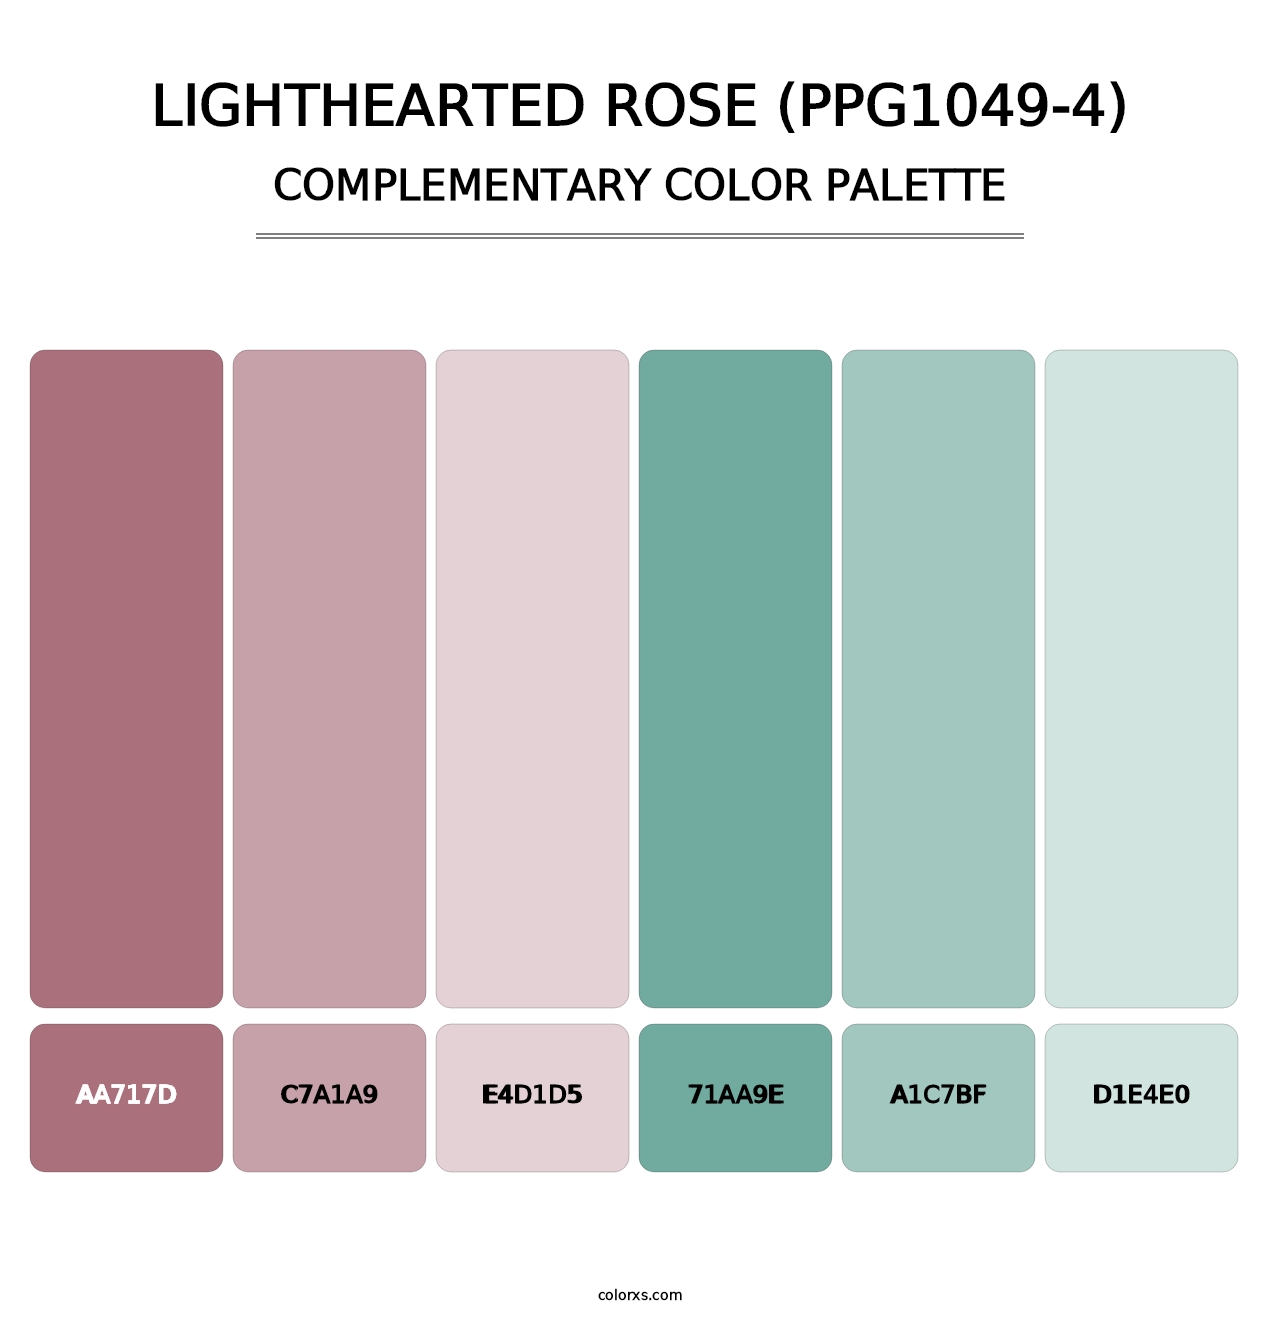 Lighthearted Rose (PPG1049-4) - Complementary Color Palette